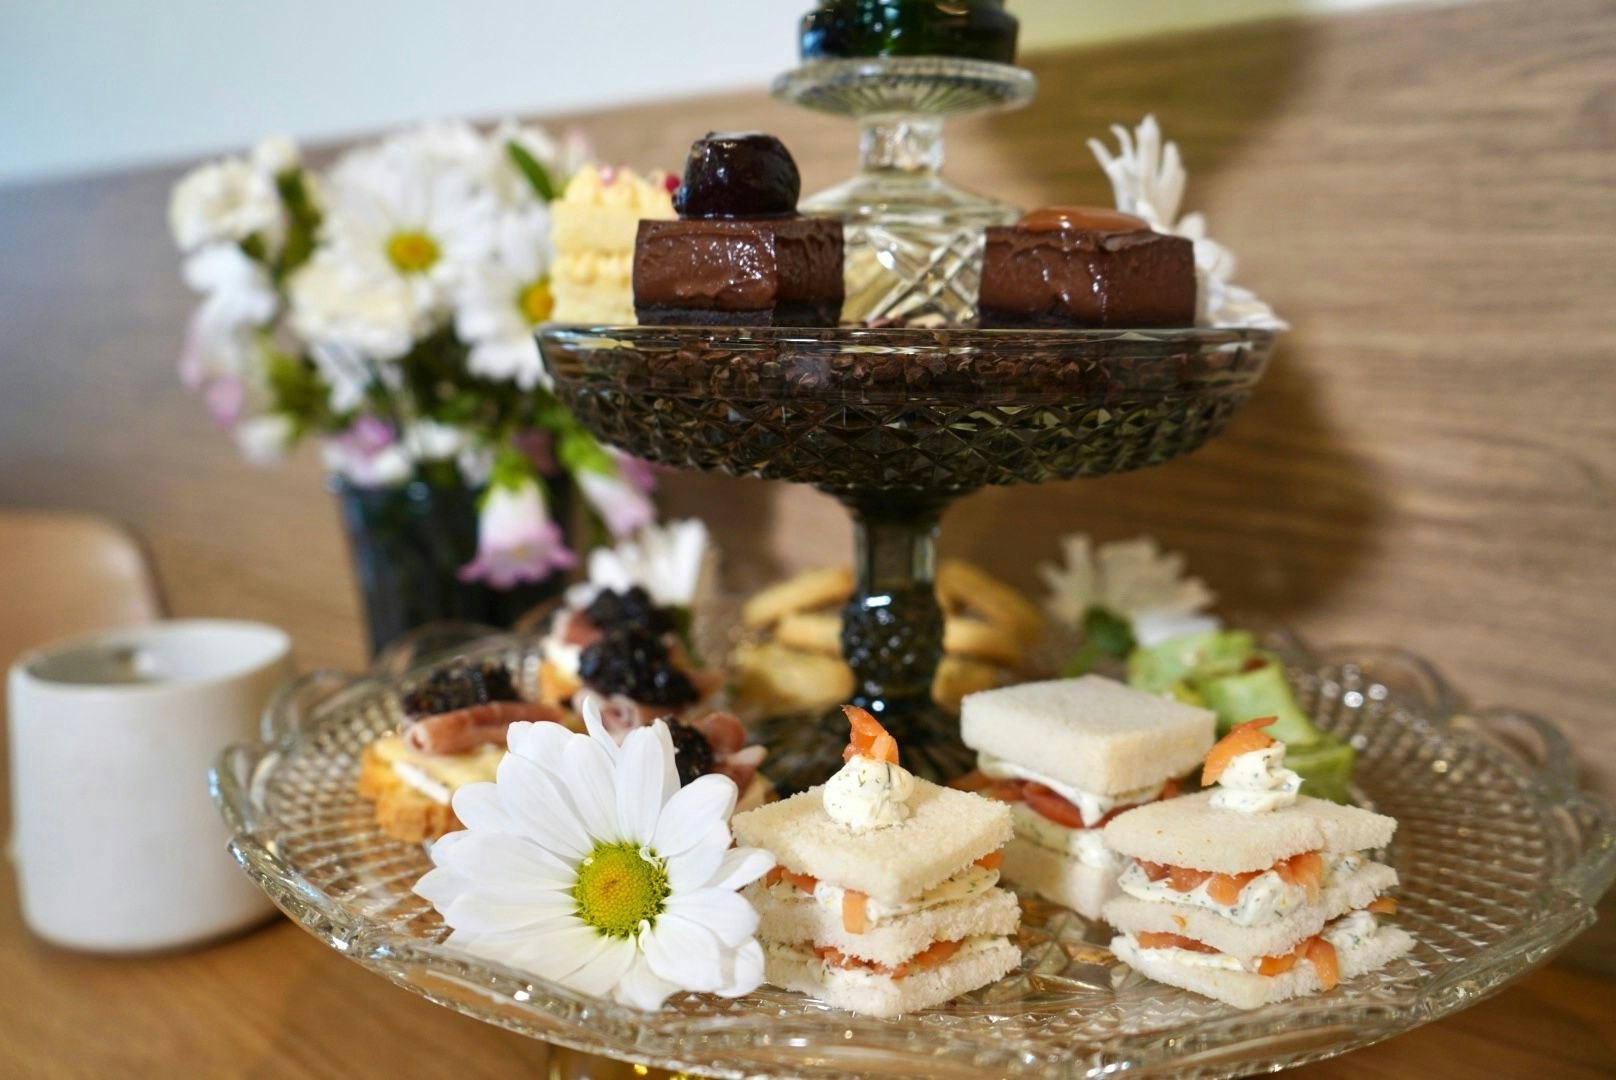 Assorted sandwiches and desserts on cake tray